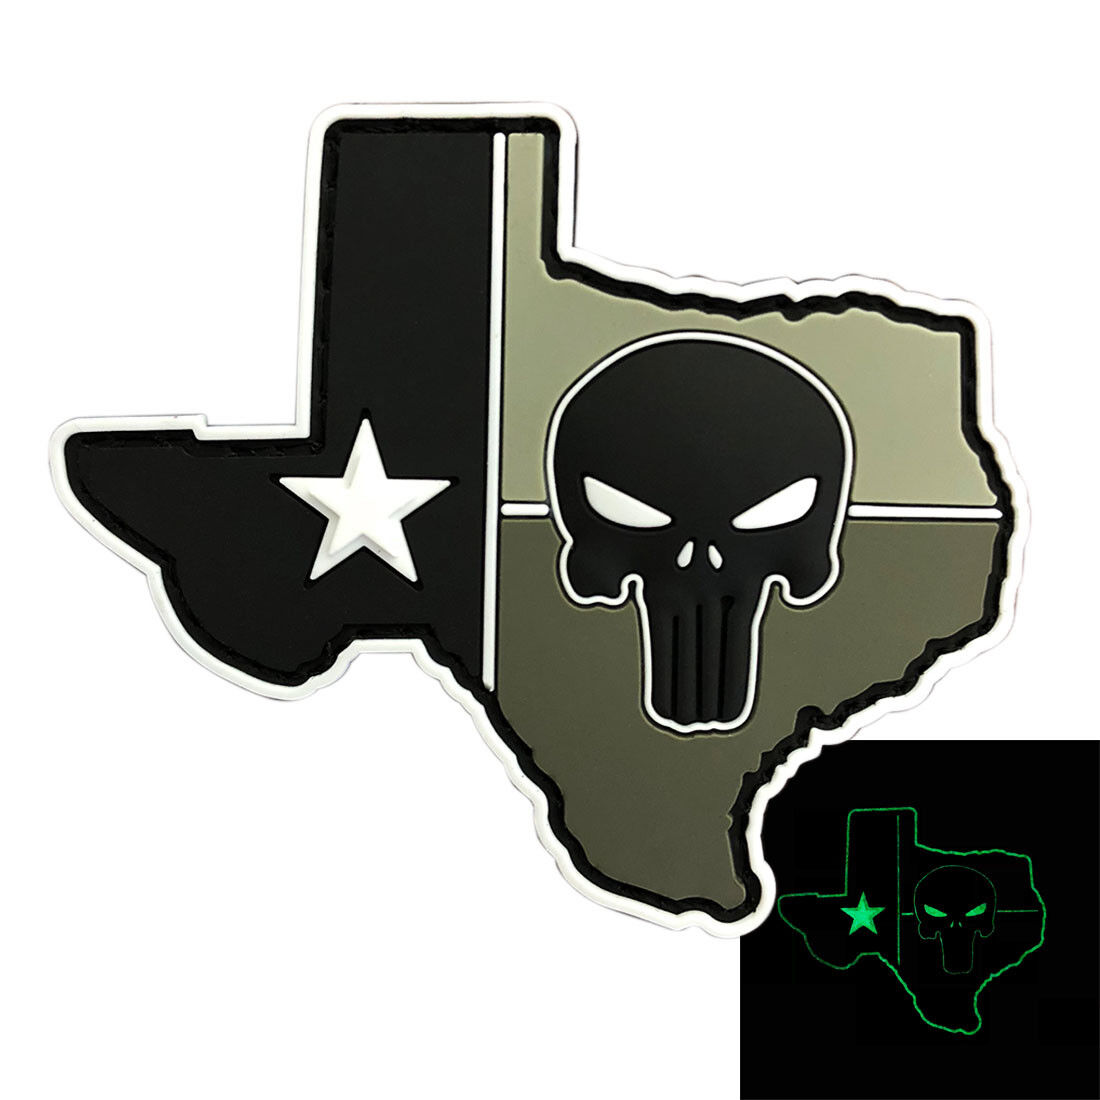 TEXAS STATE FLAG MAP SKULL TX  HOOK PATCH (3D-PVC Rubber-GLOW DARK) 